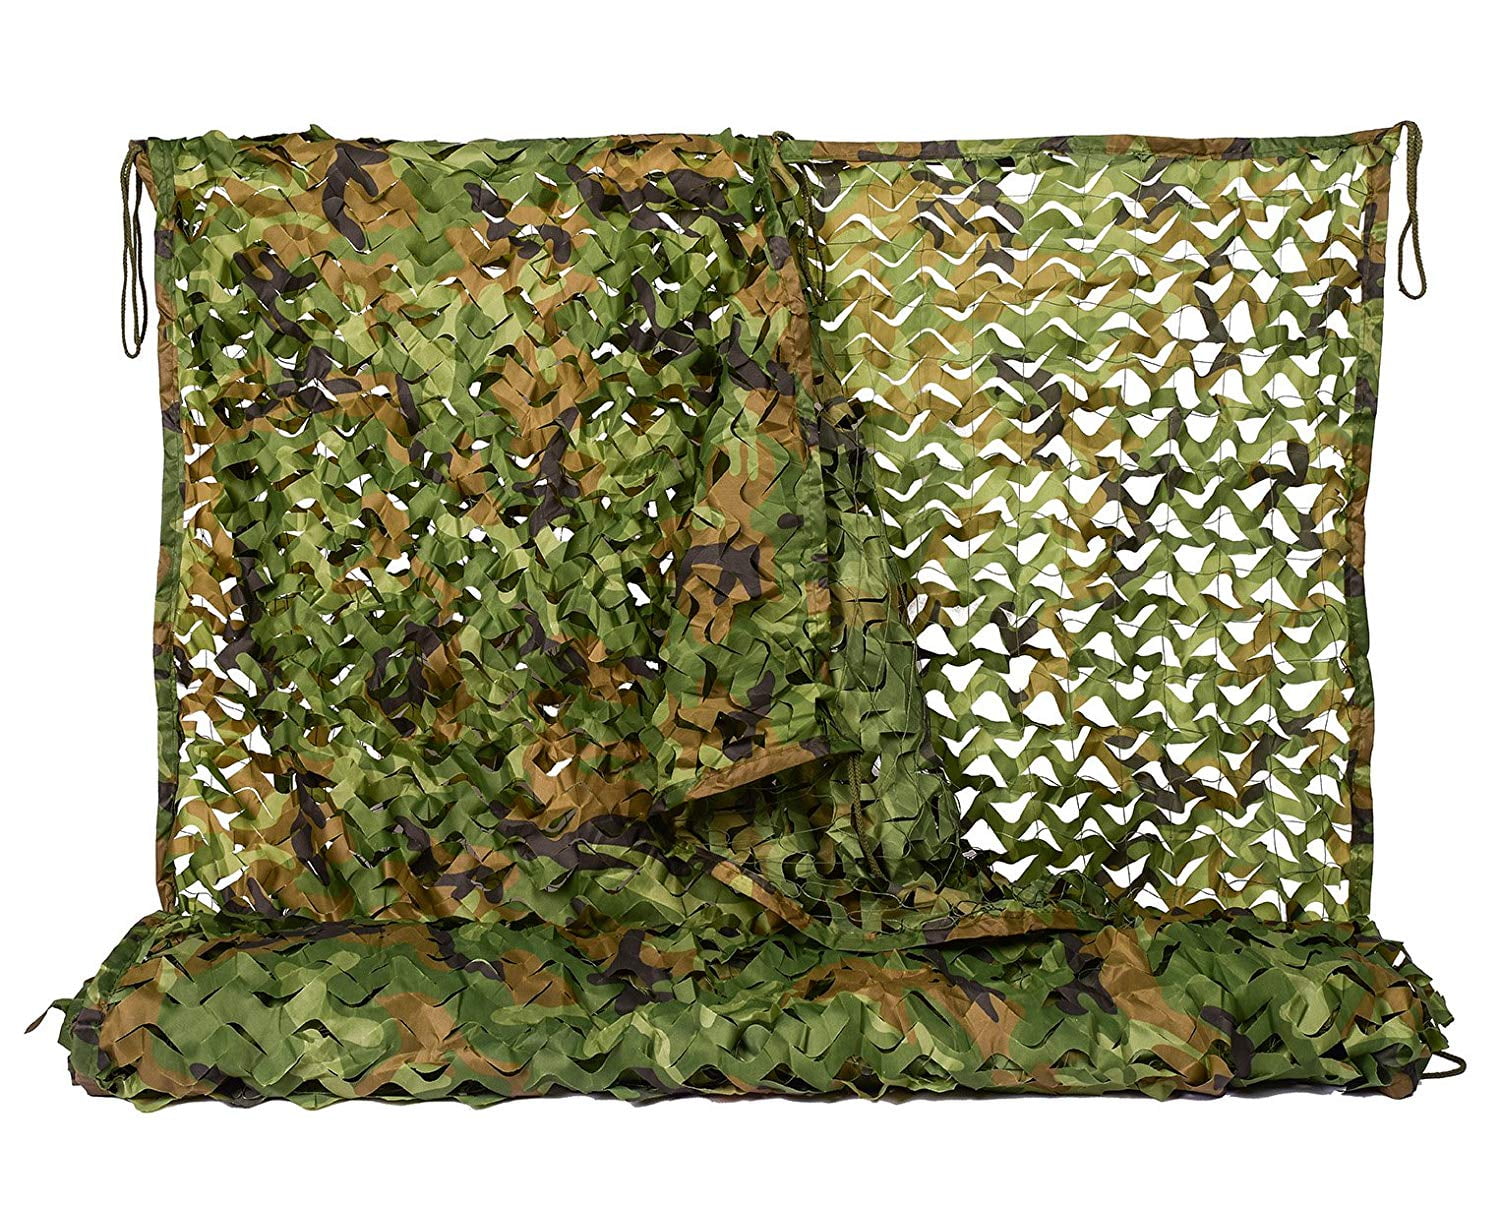 Camouflage Camo Army Green Net Netting Camping Military Hunting Woodland Leaves 